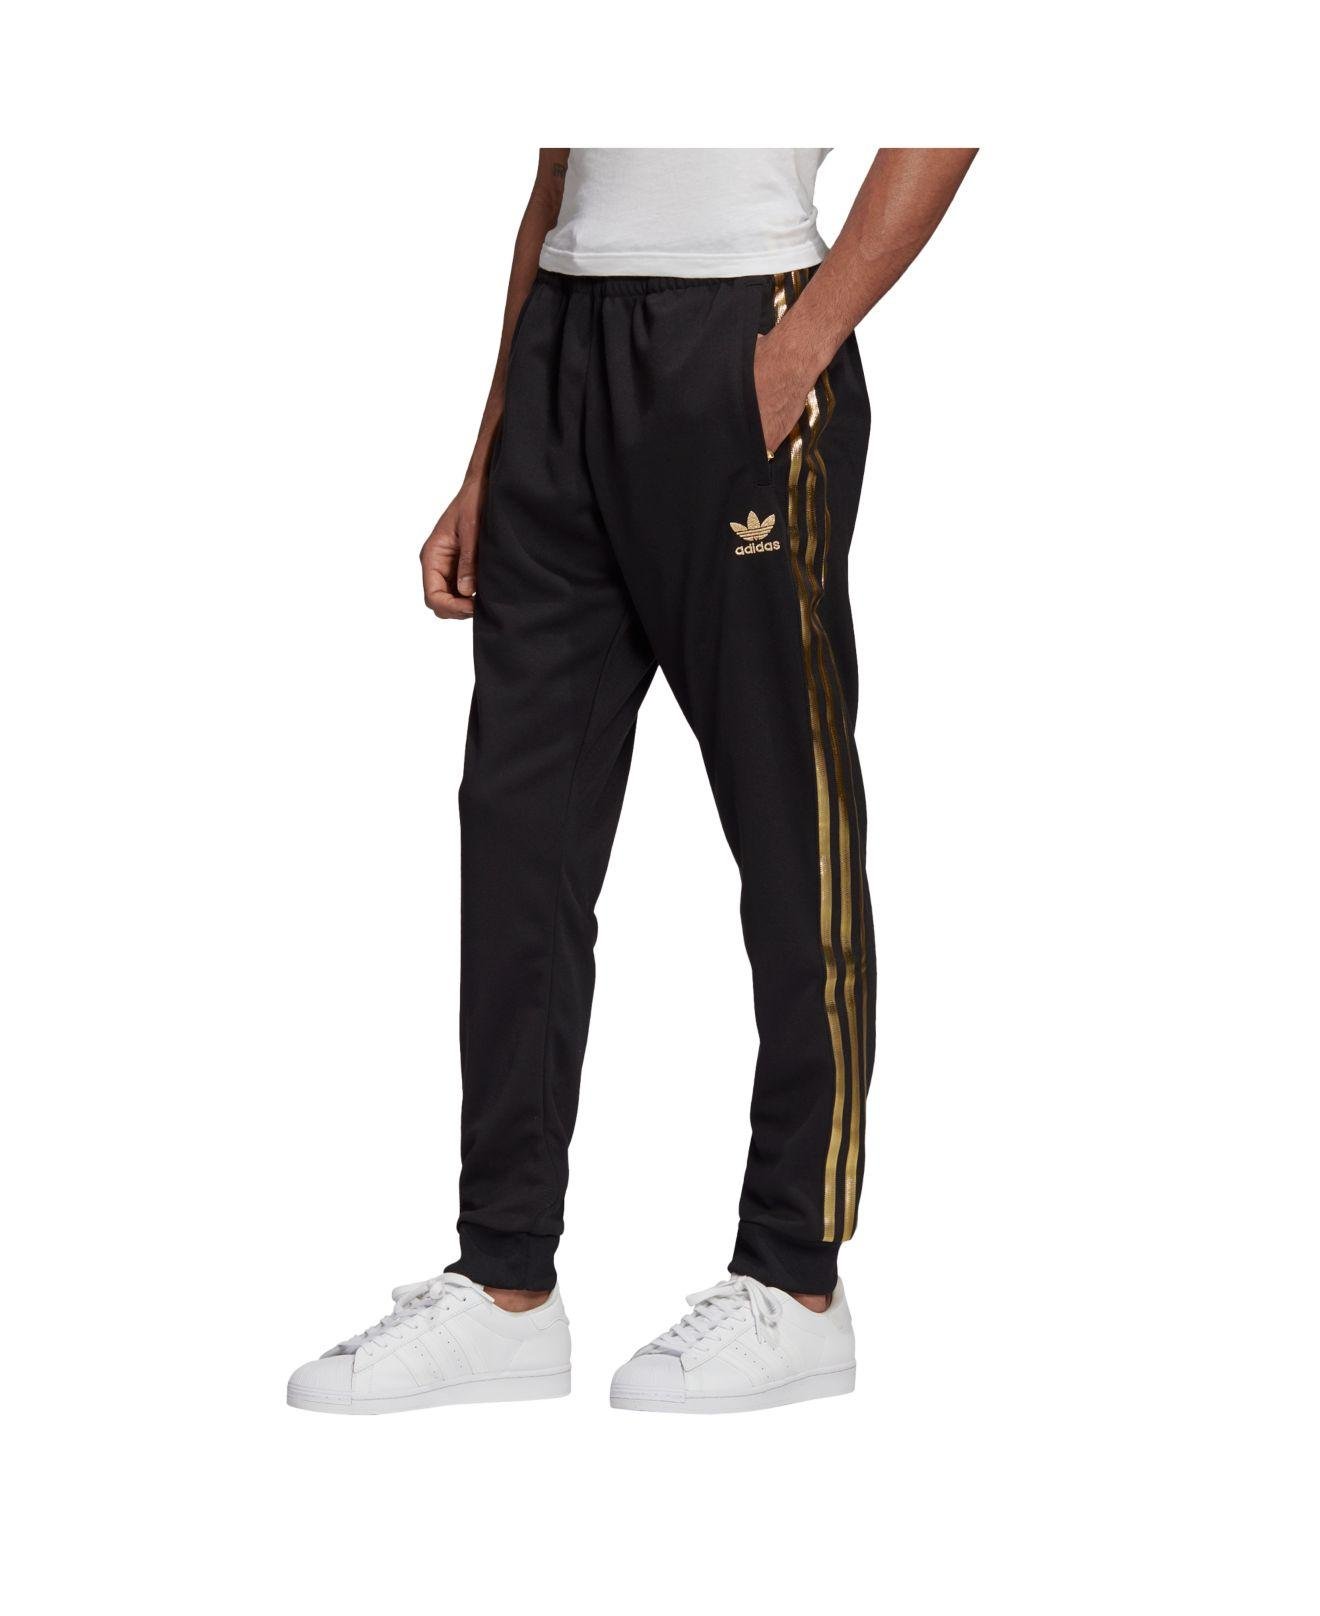 adidas Synthetic Sst 24k Track Pants in Black/Gold (Black) for Men - Lyst